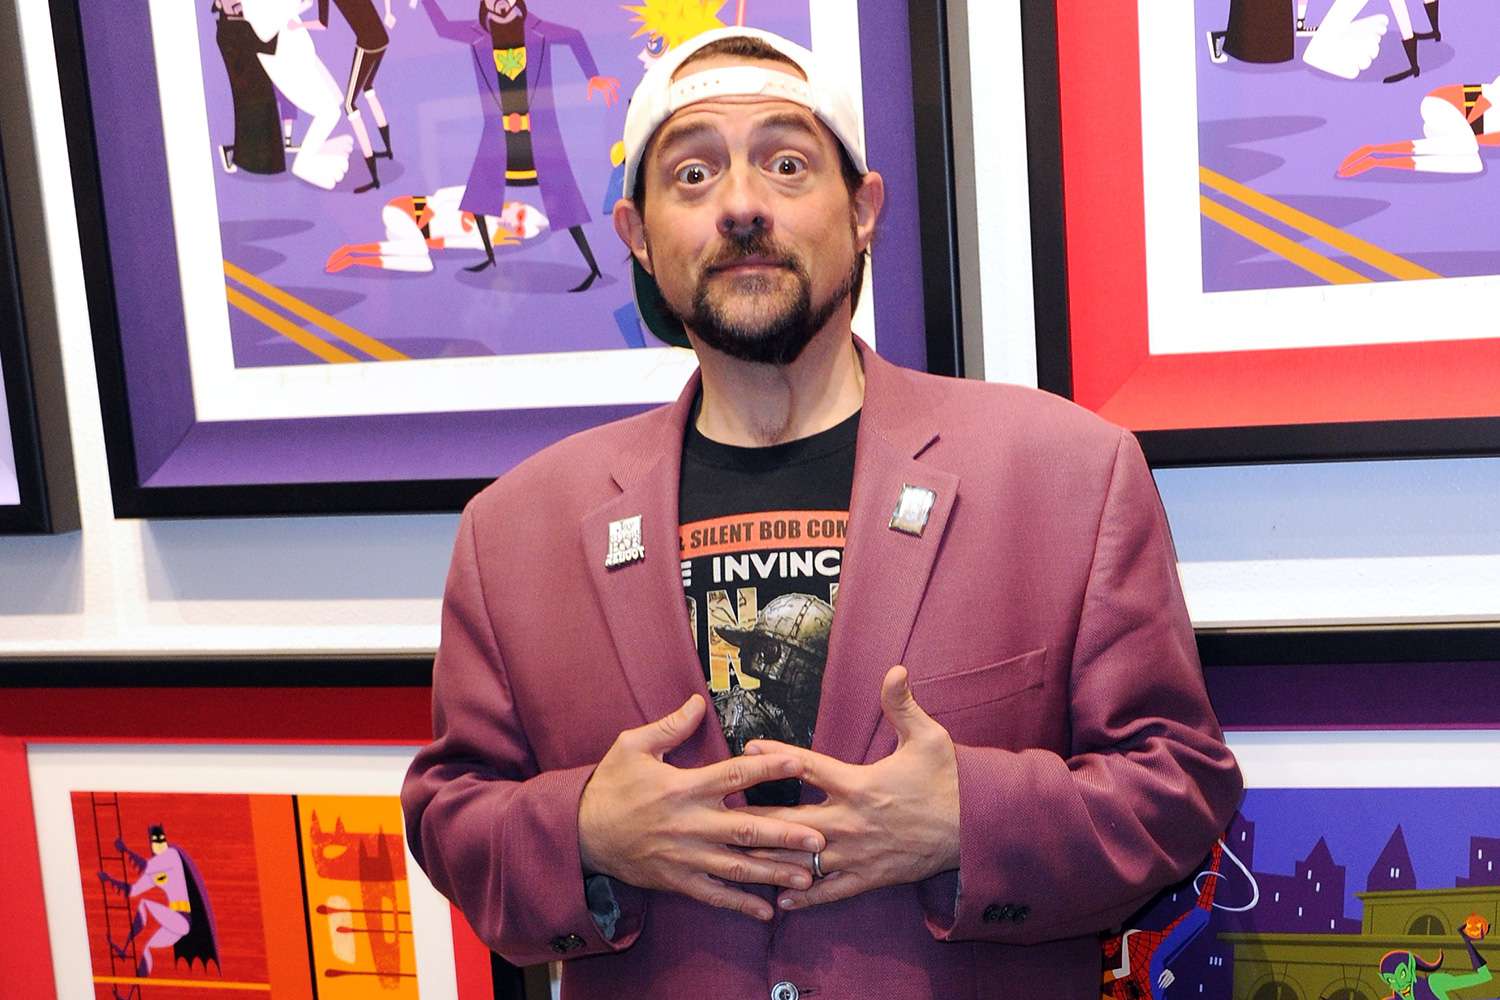 Kevin Smith Works 'Under the Assumption I'm Living on Borrowed Time' Six Years After Heart Attack (Exclusive)